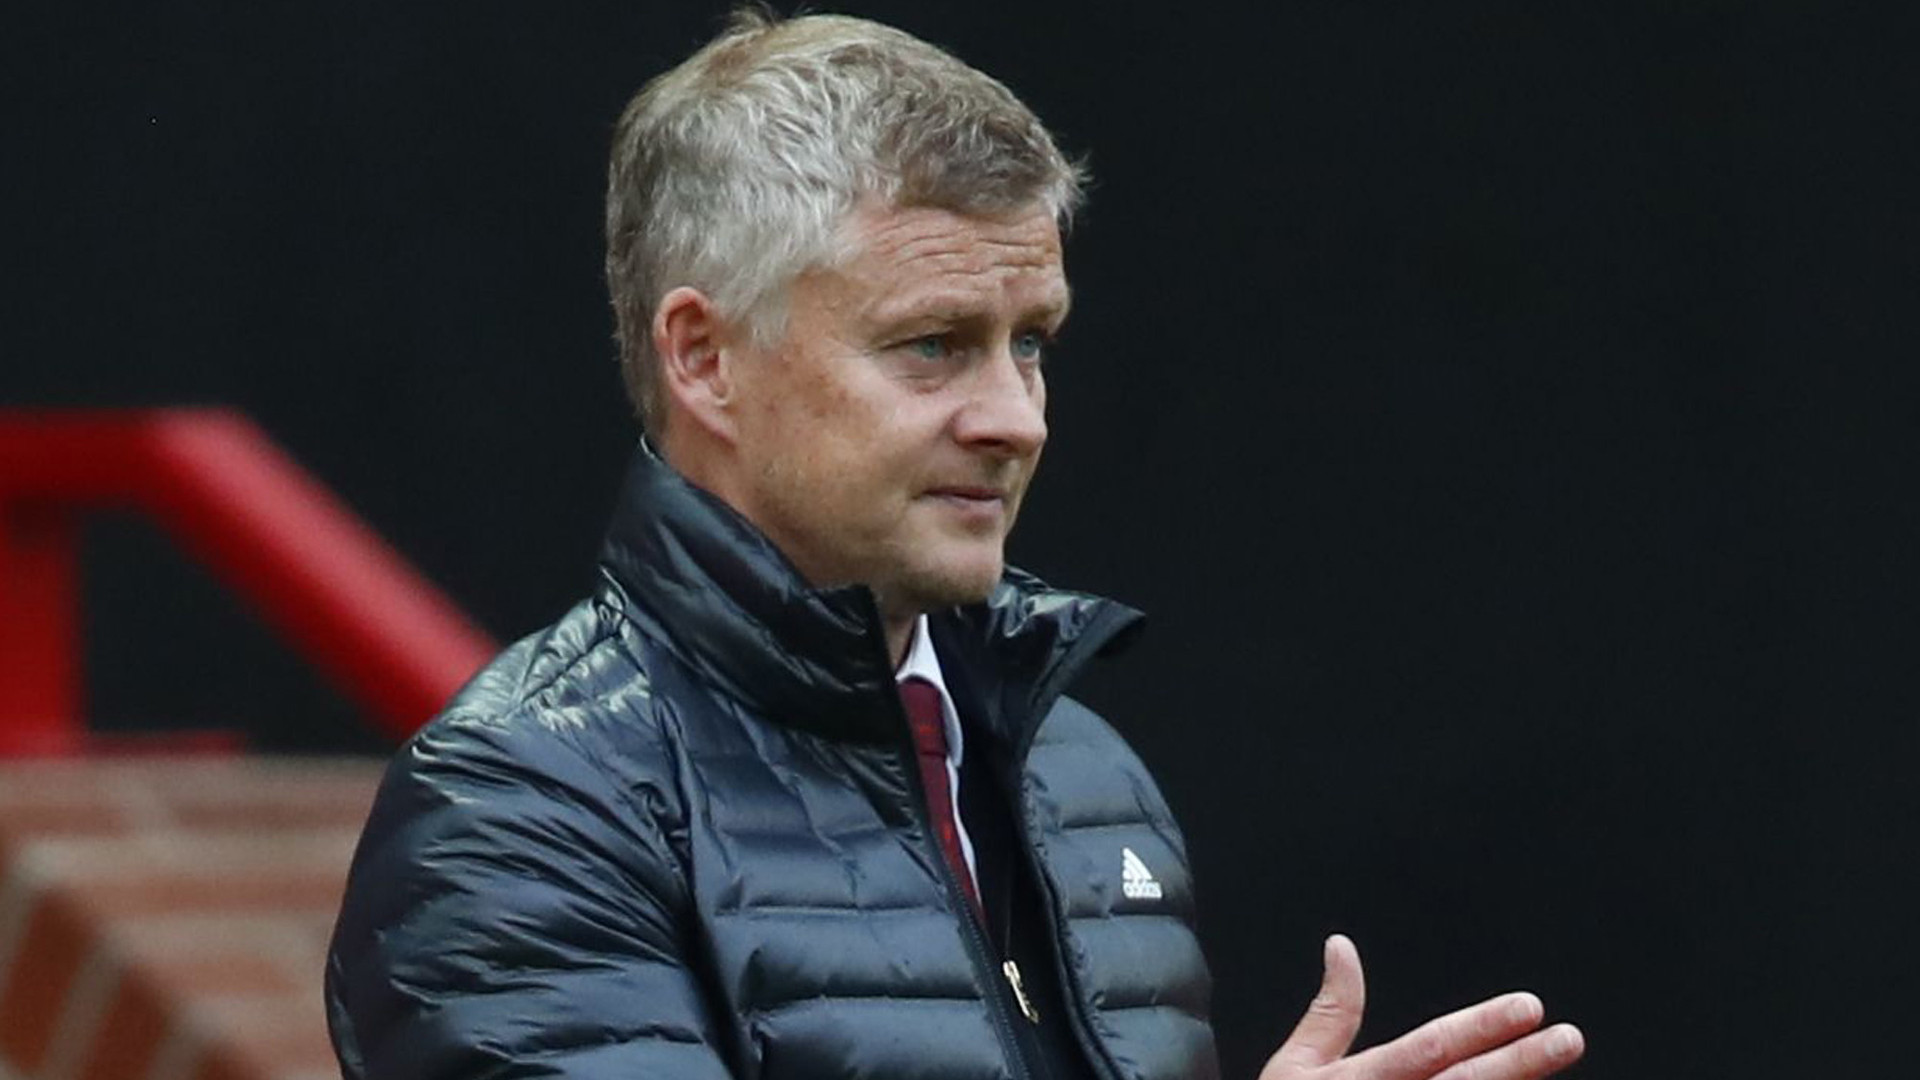 Manchester United manager Ole Gunnar Solskjaer discussed the club's Premier League title chances moving forward.